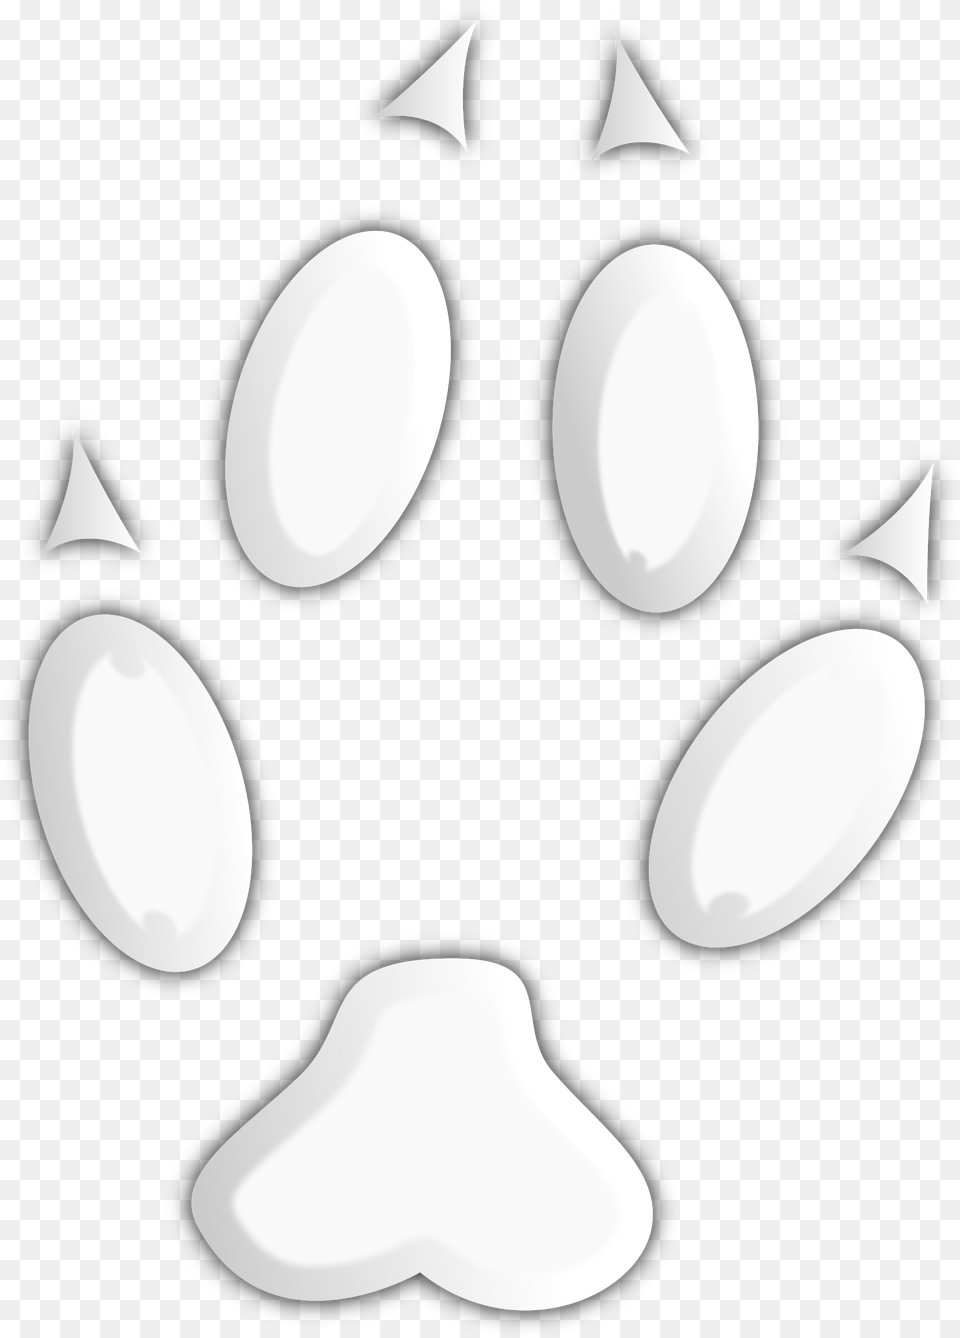 This Icons Design Of Footprint, Lighting, Stencil, Egg, Electronics Free Png Download